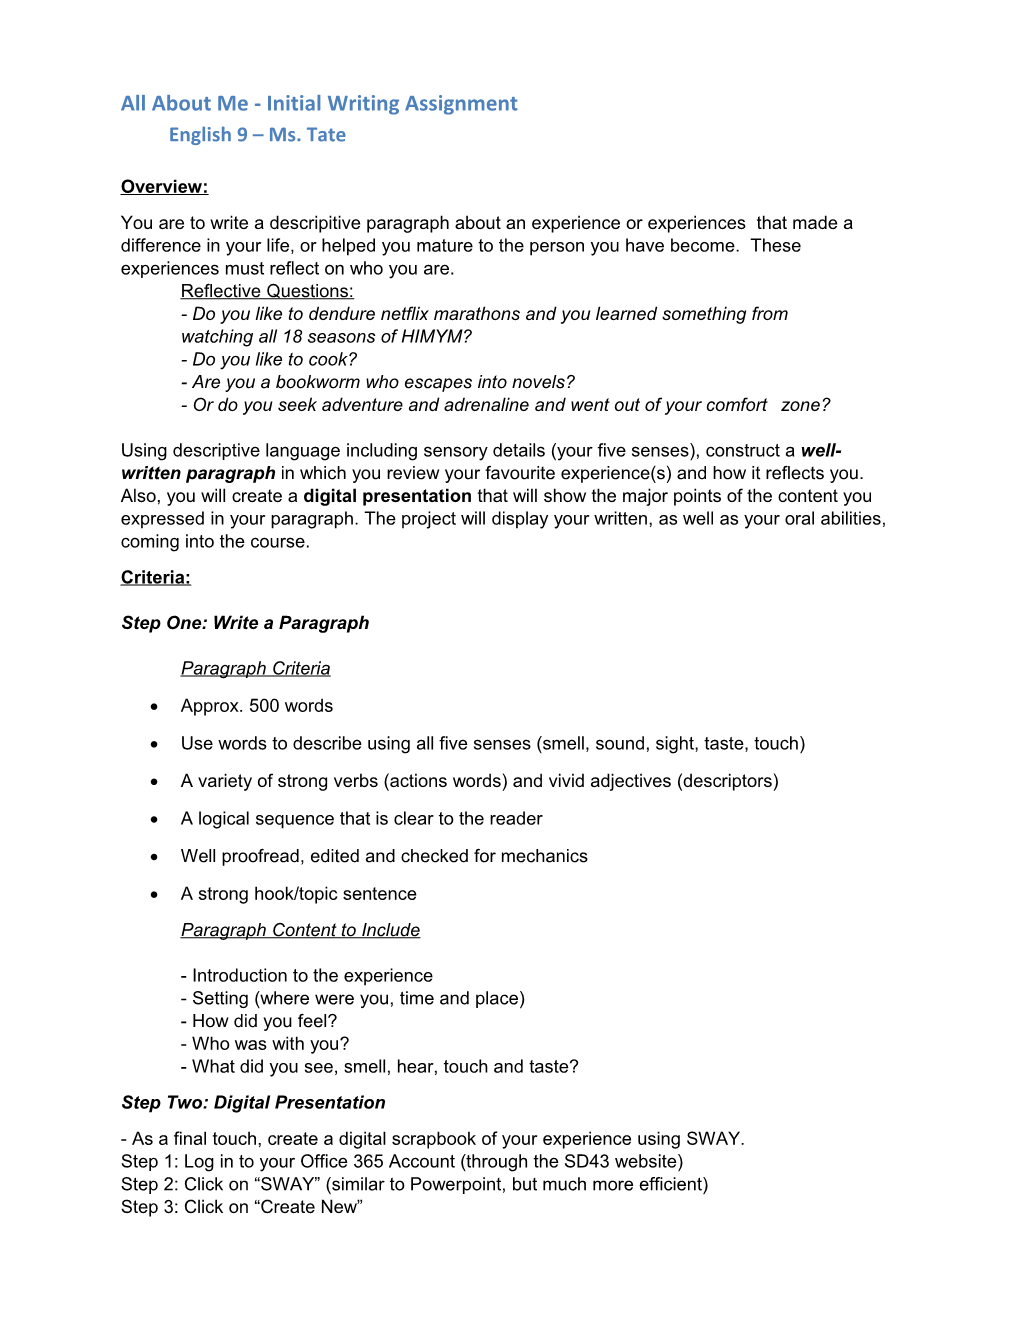 All About Me - Initial Writing Assignment English 9 Ms. Tate